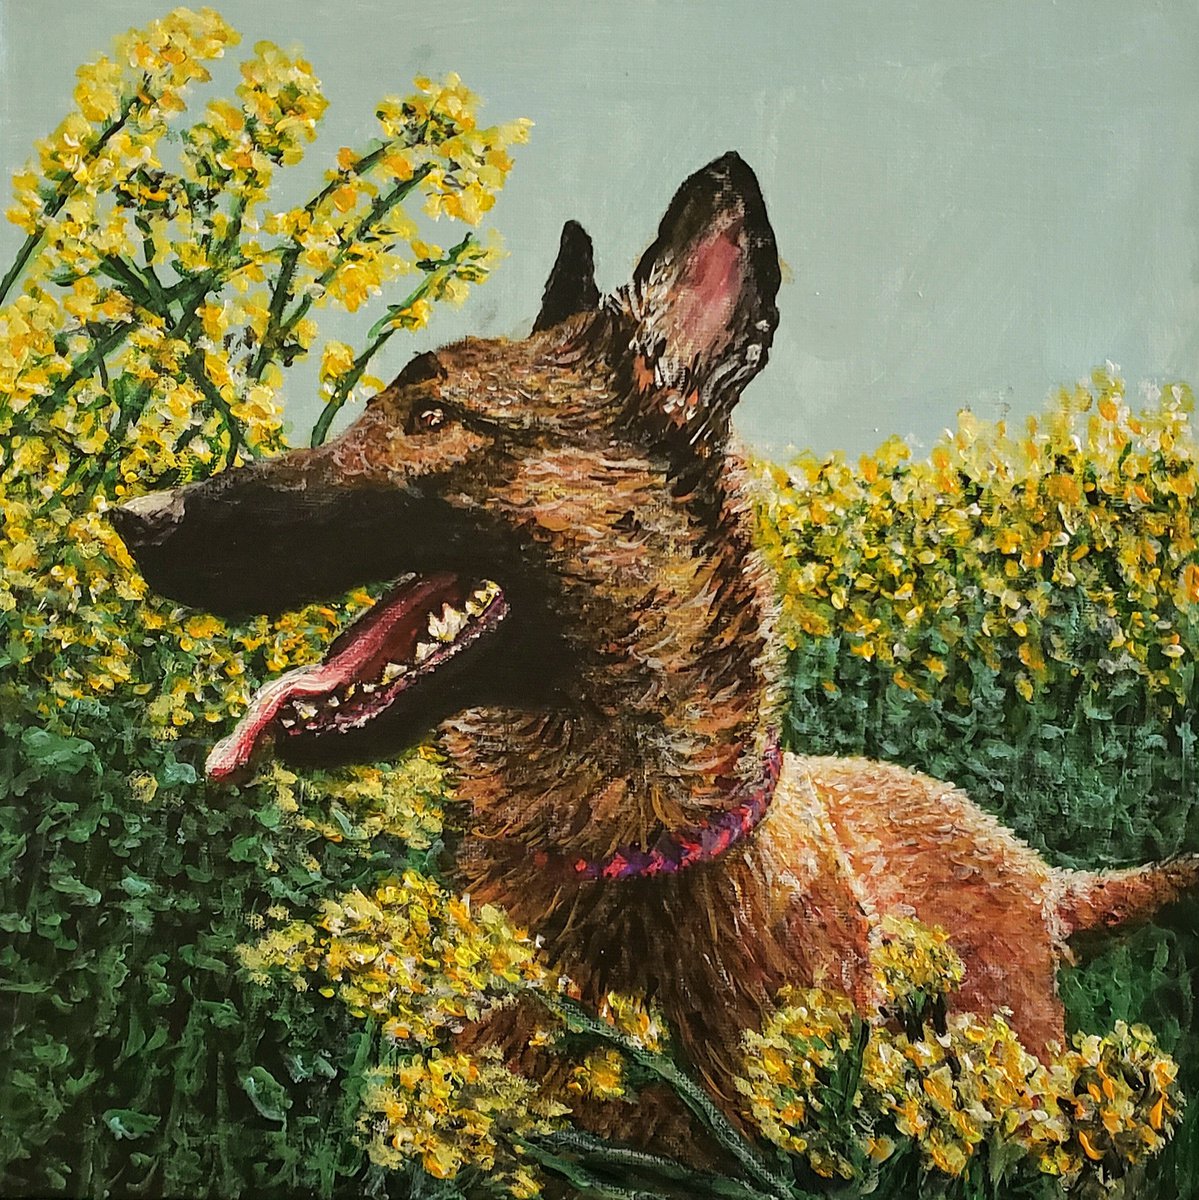 Malinois Amongst Flowers by Robbie Potter